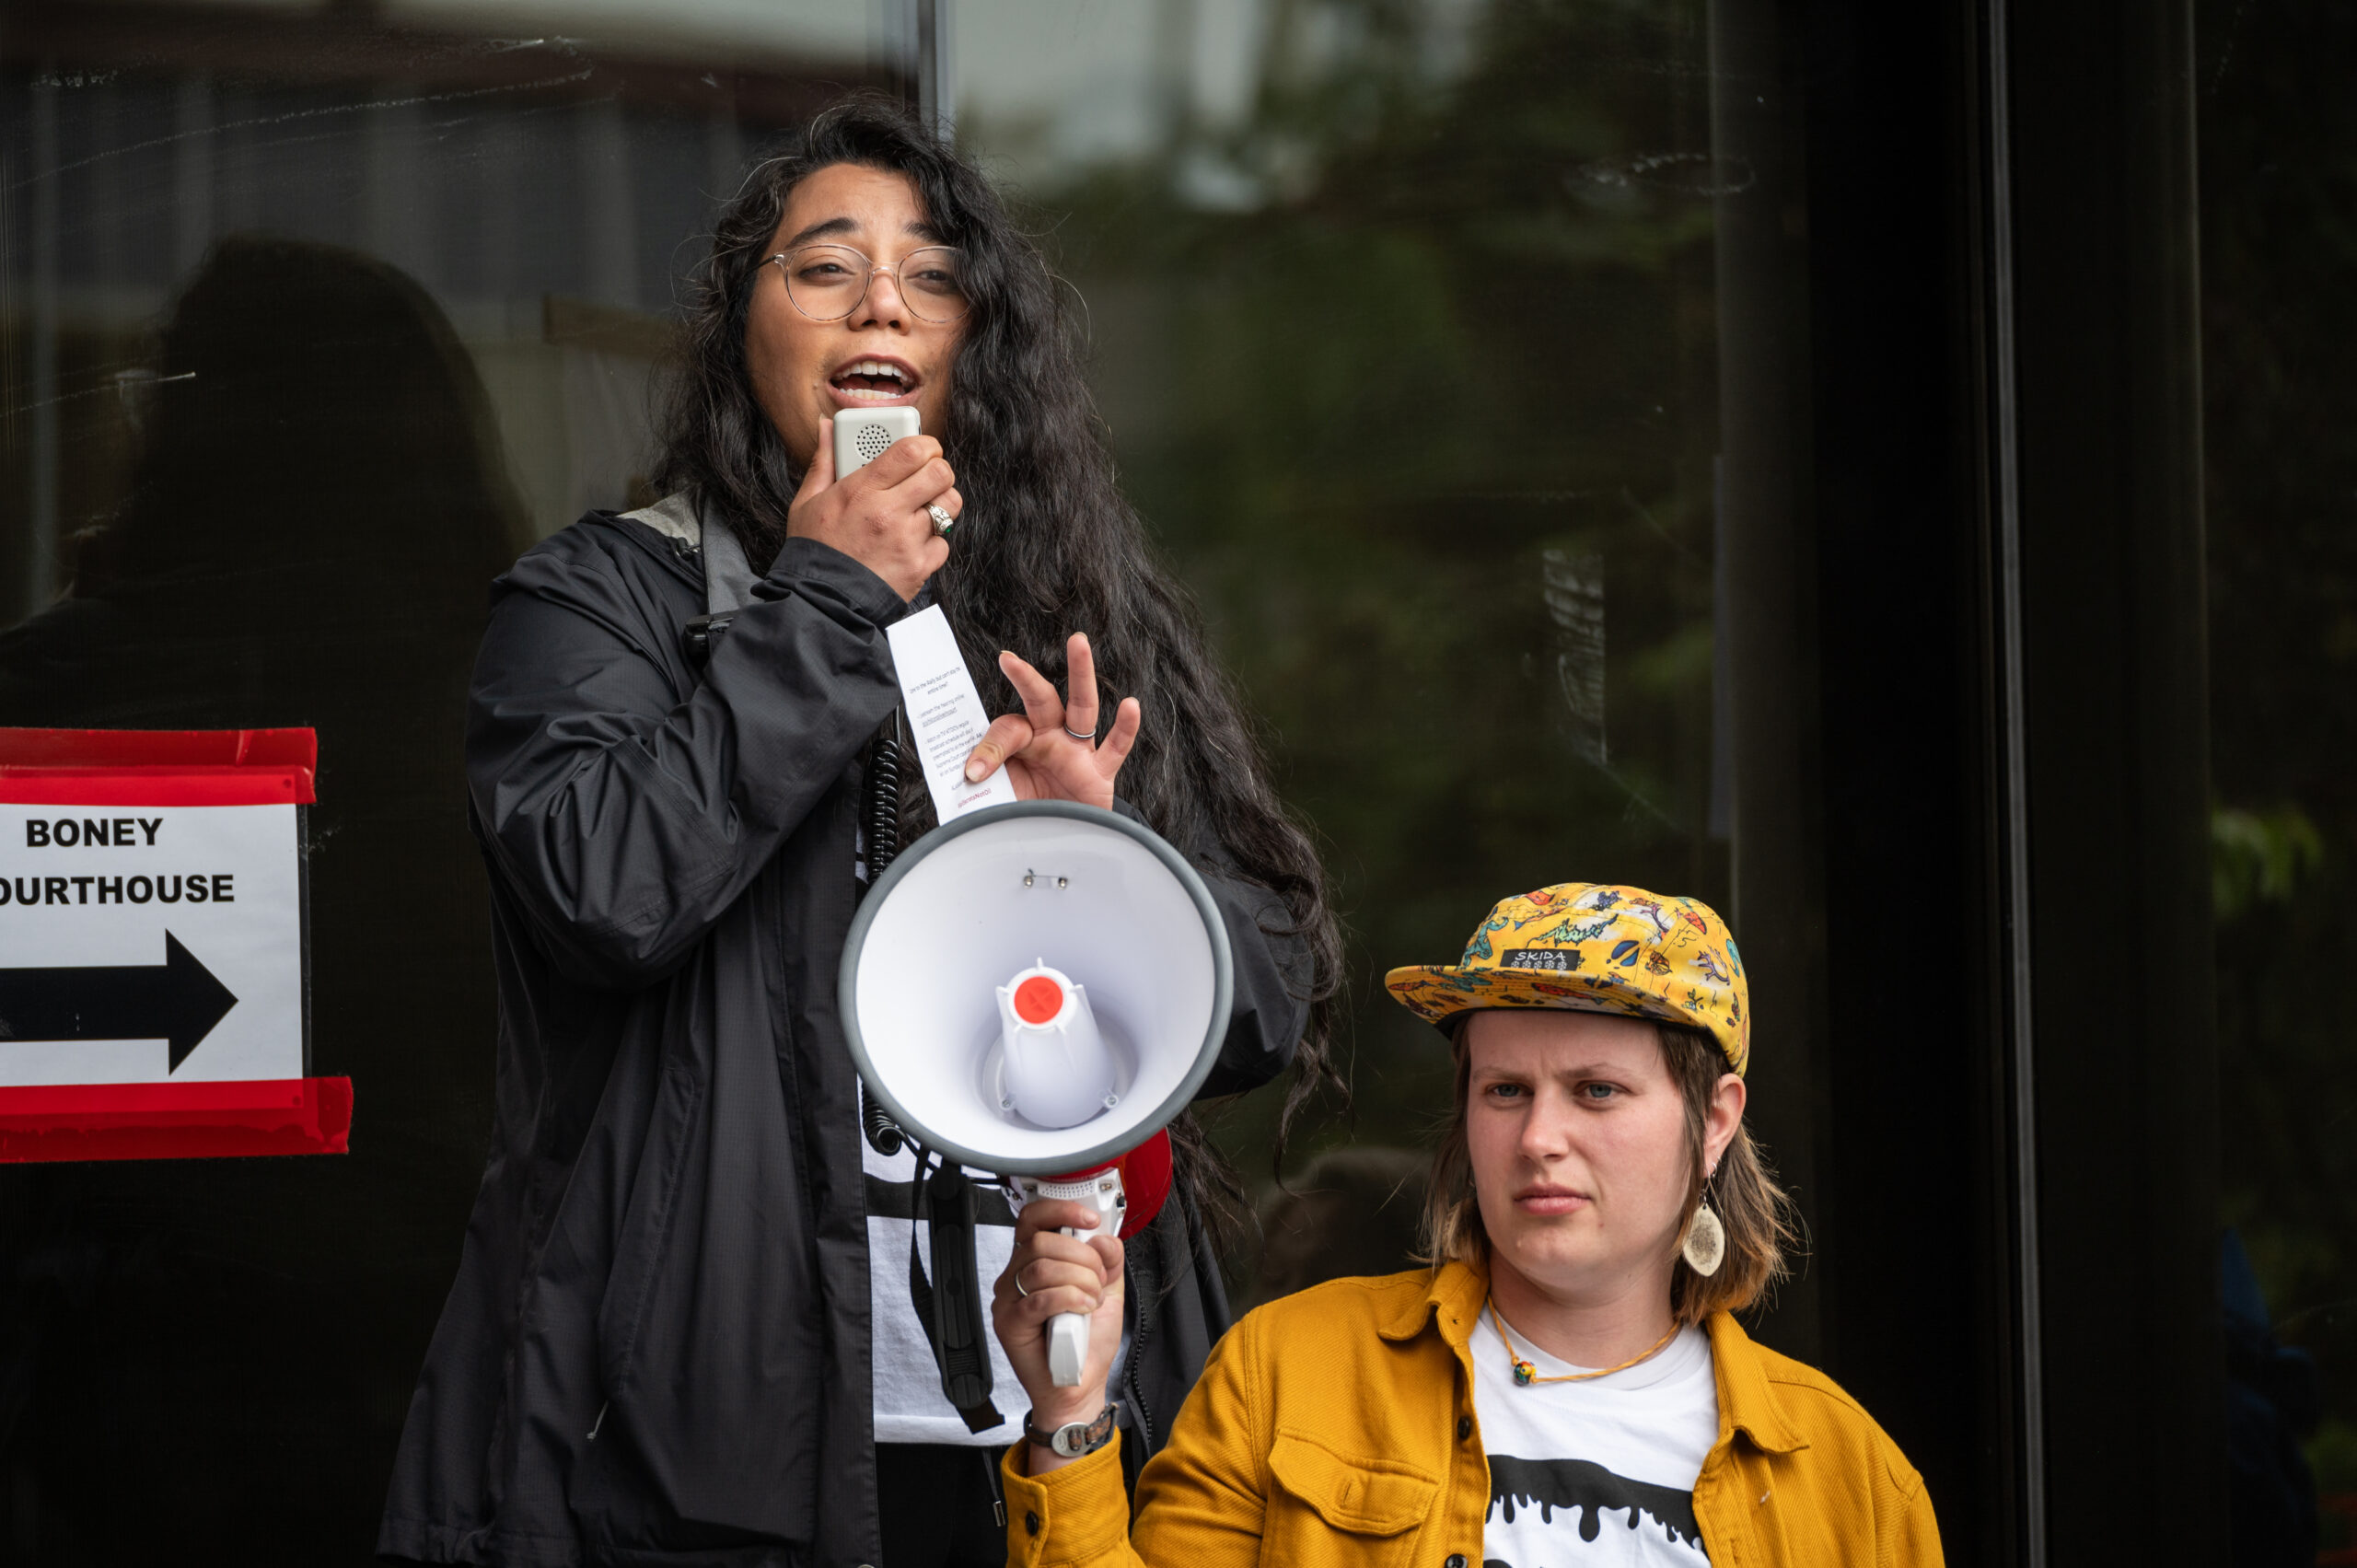 A woman with a black jacket on speaks into a megaphone, held by a person in a yellow shirt.